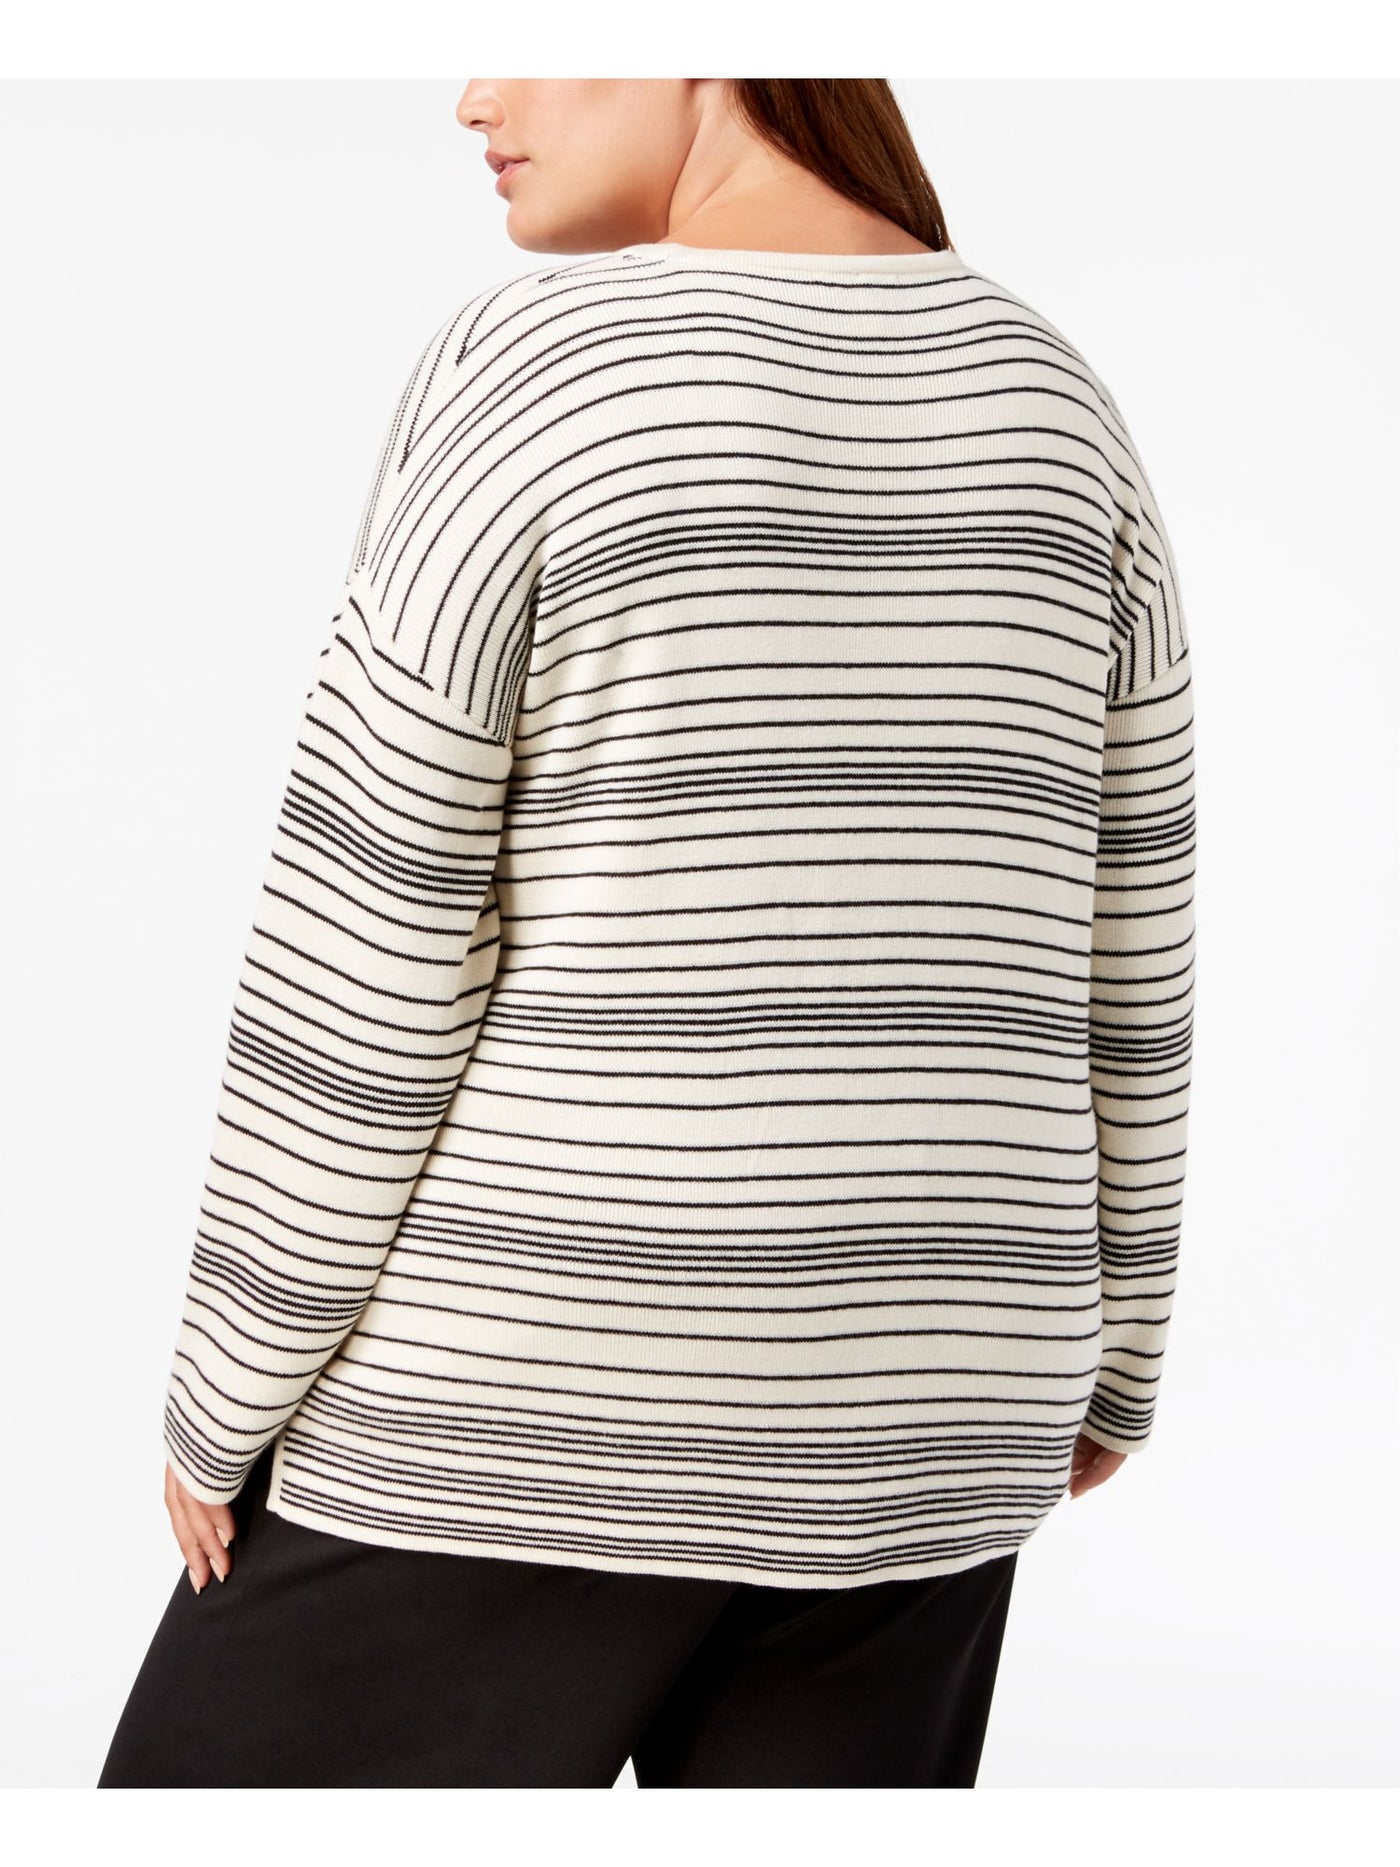 EILEEN FISHER Womens Ivory Ribbed Vented Hem Striped Long Sleeve Jewel Neck Sweater Plus 1X